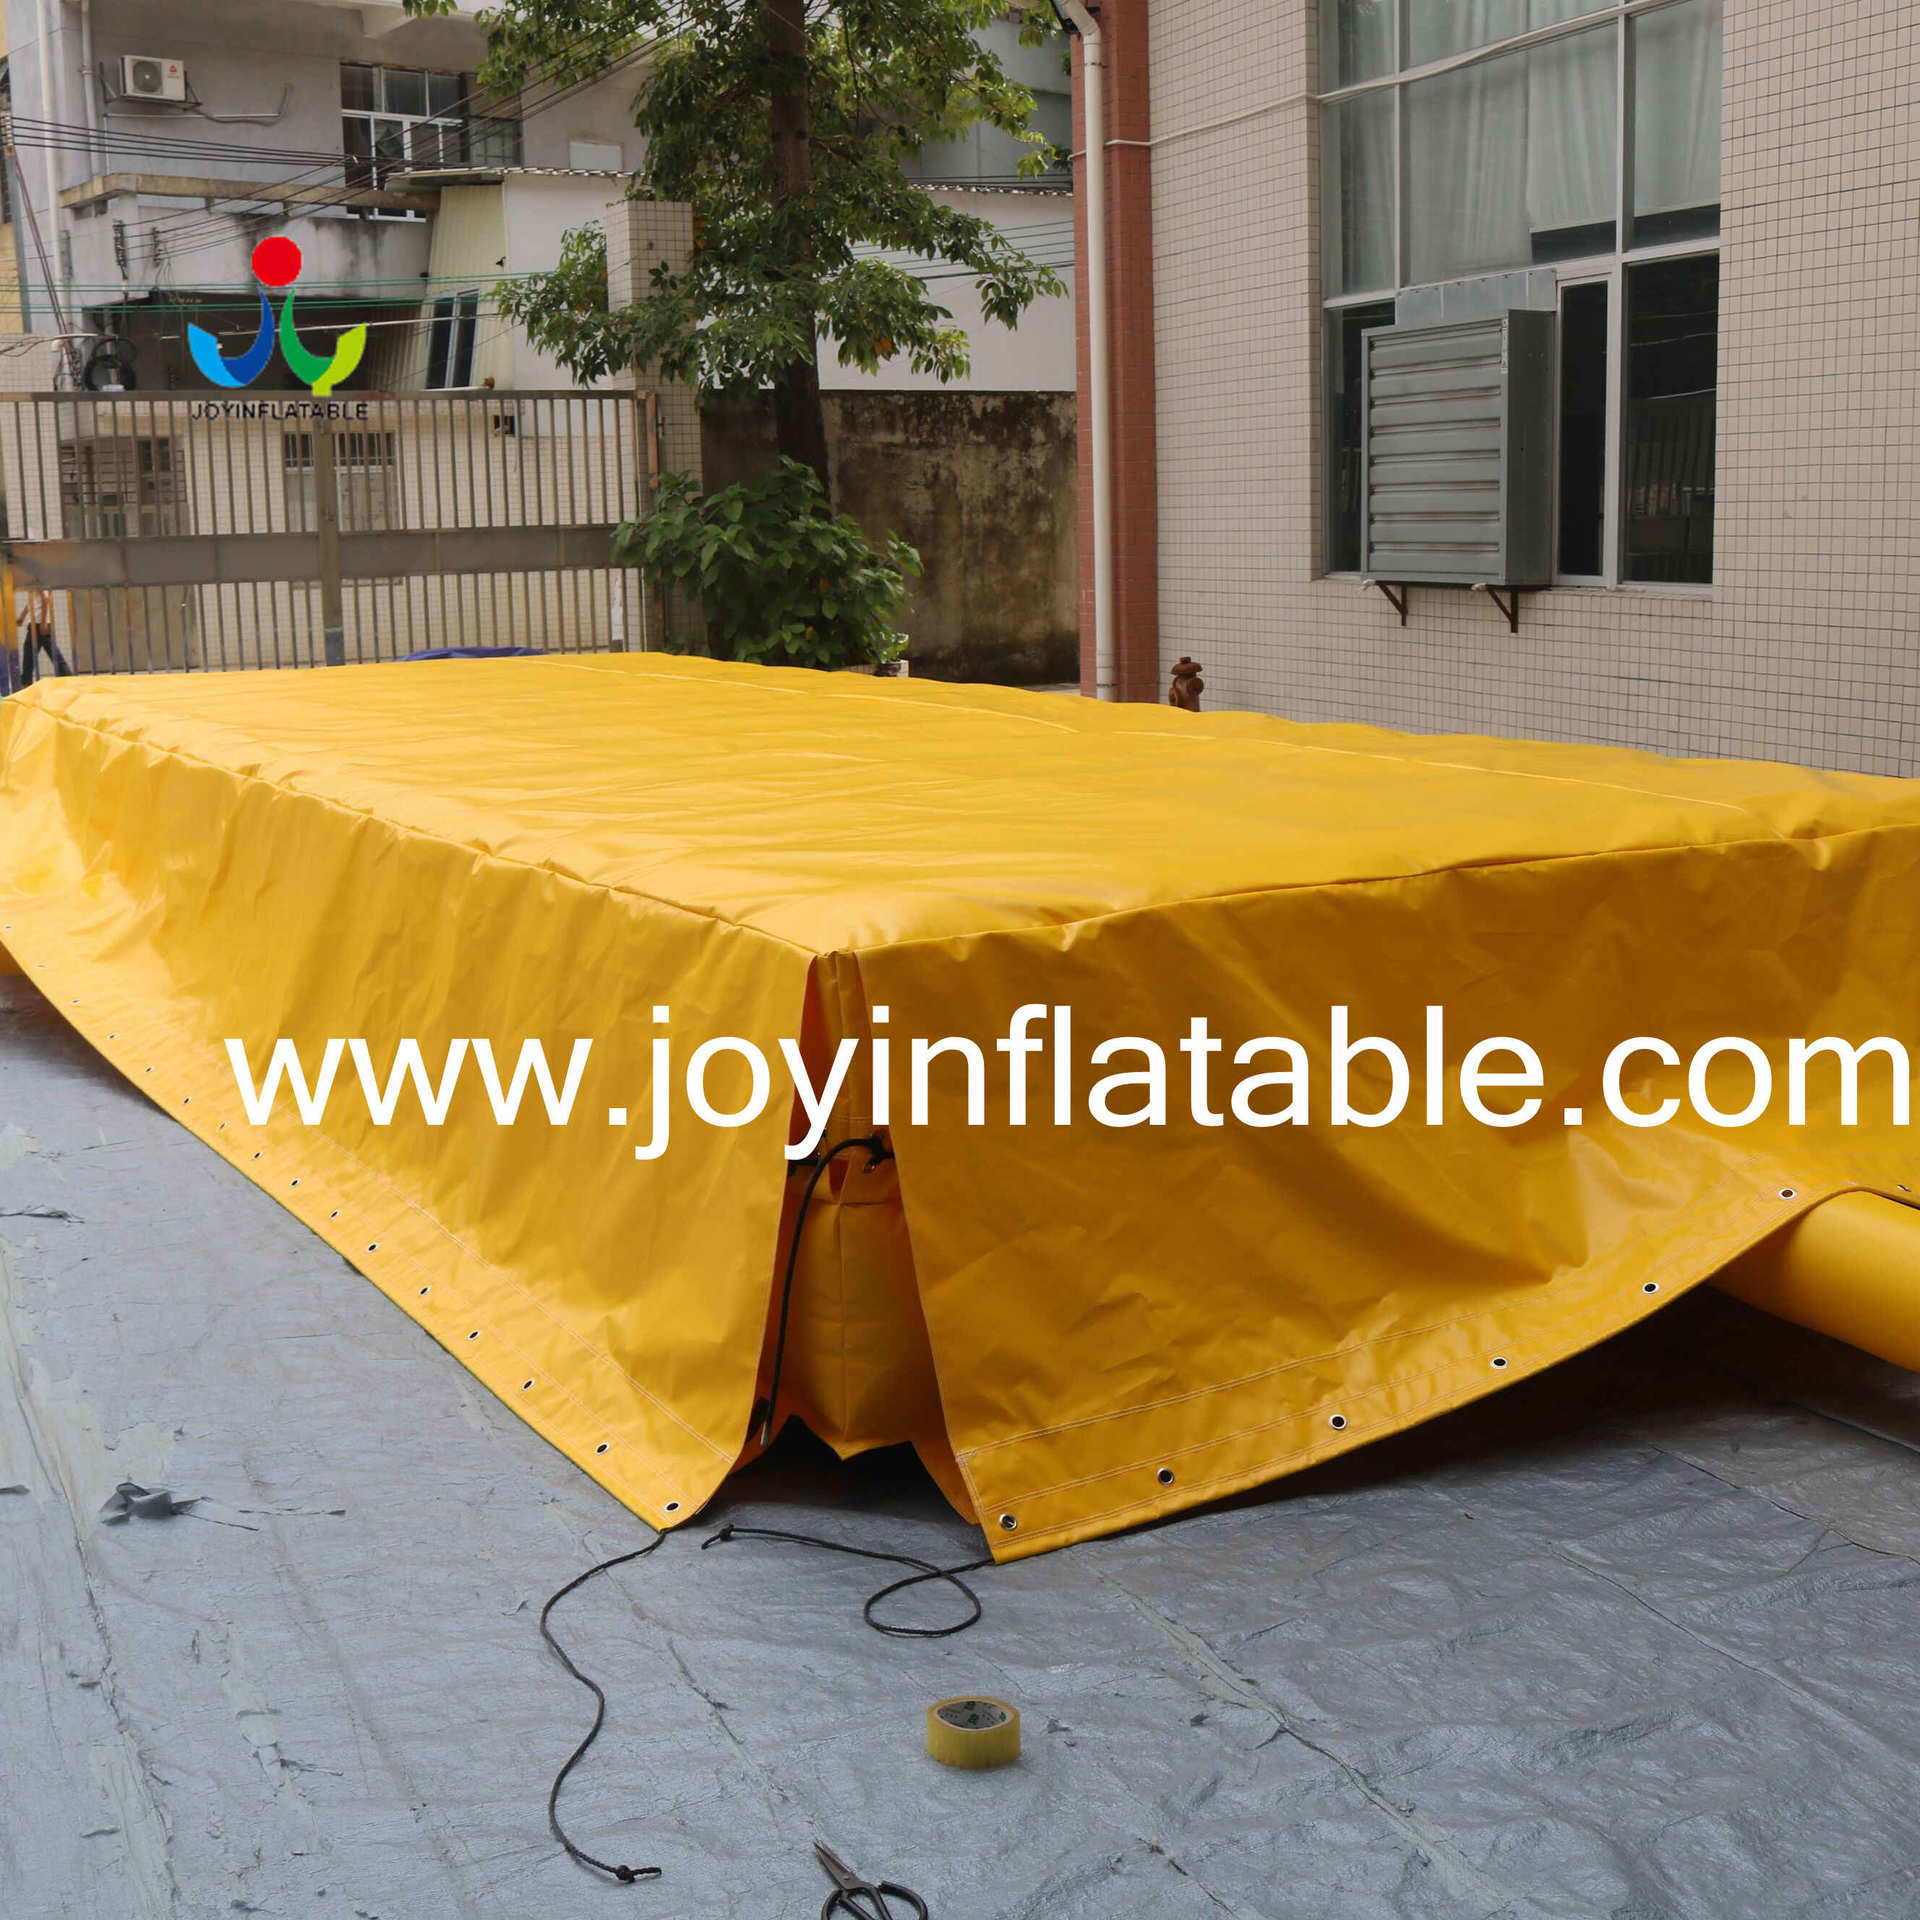 JOY inflatable outdoor bag jump cost company for outdoor